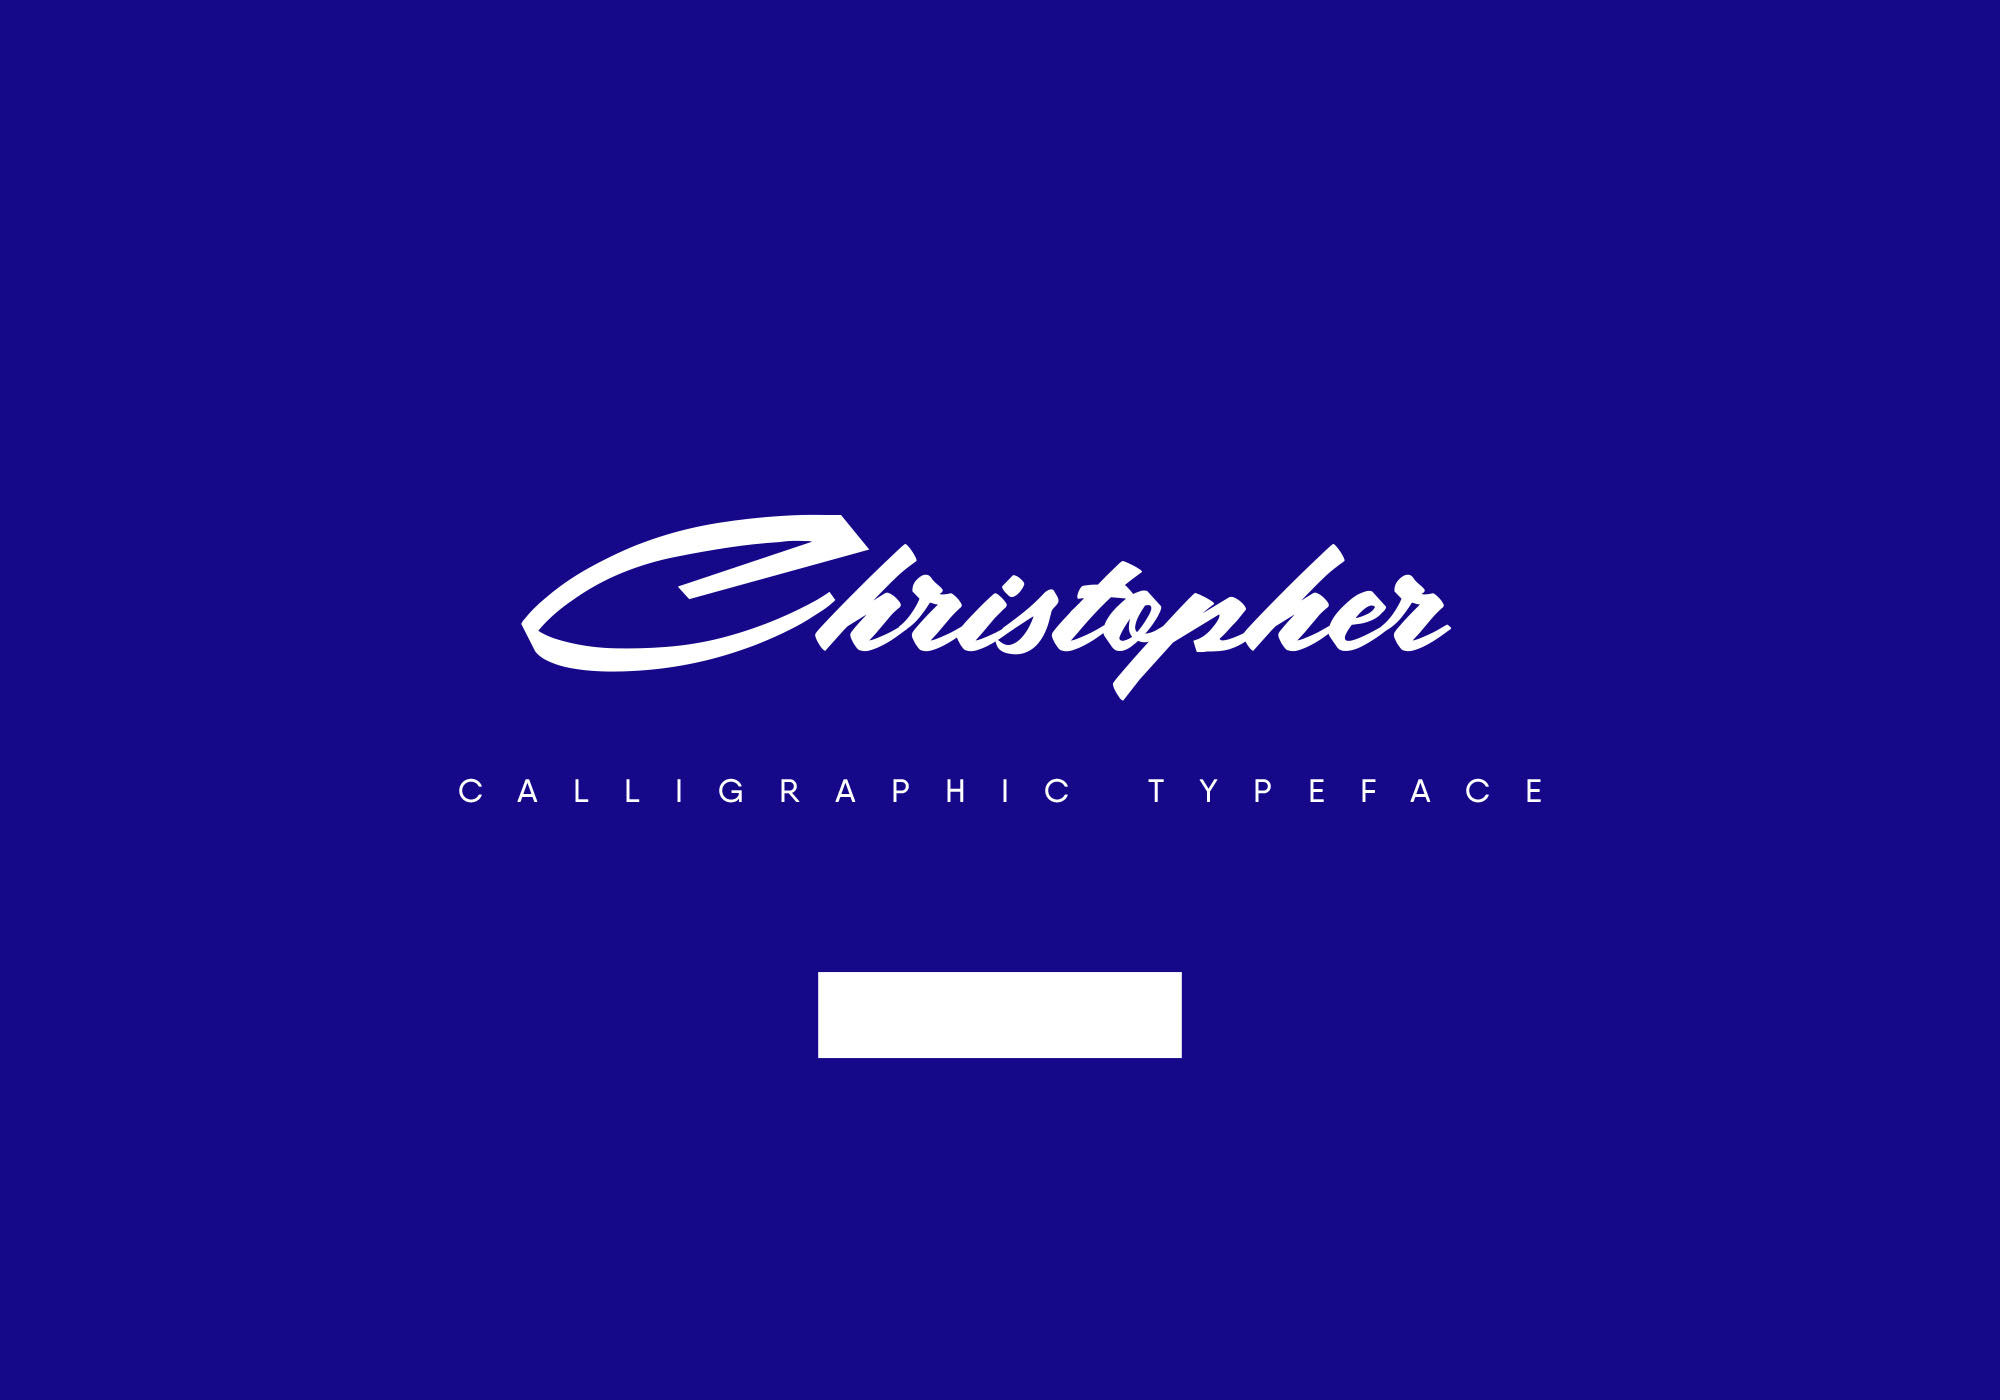 Christopher Font Free